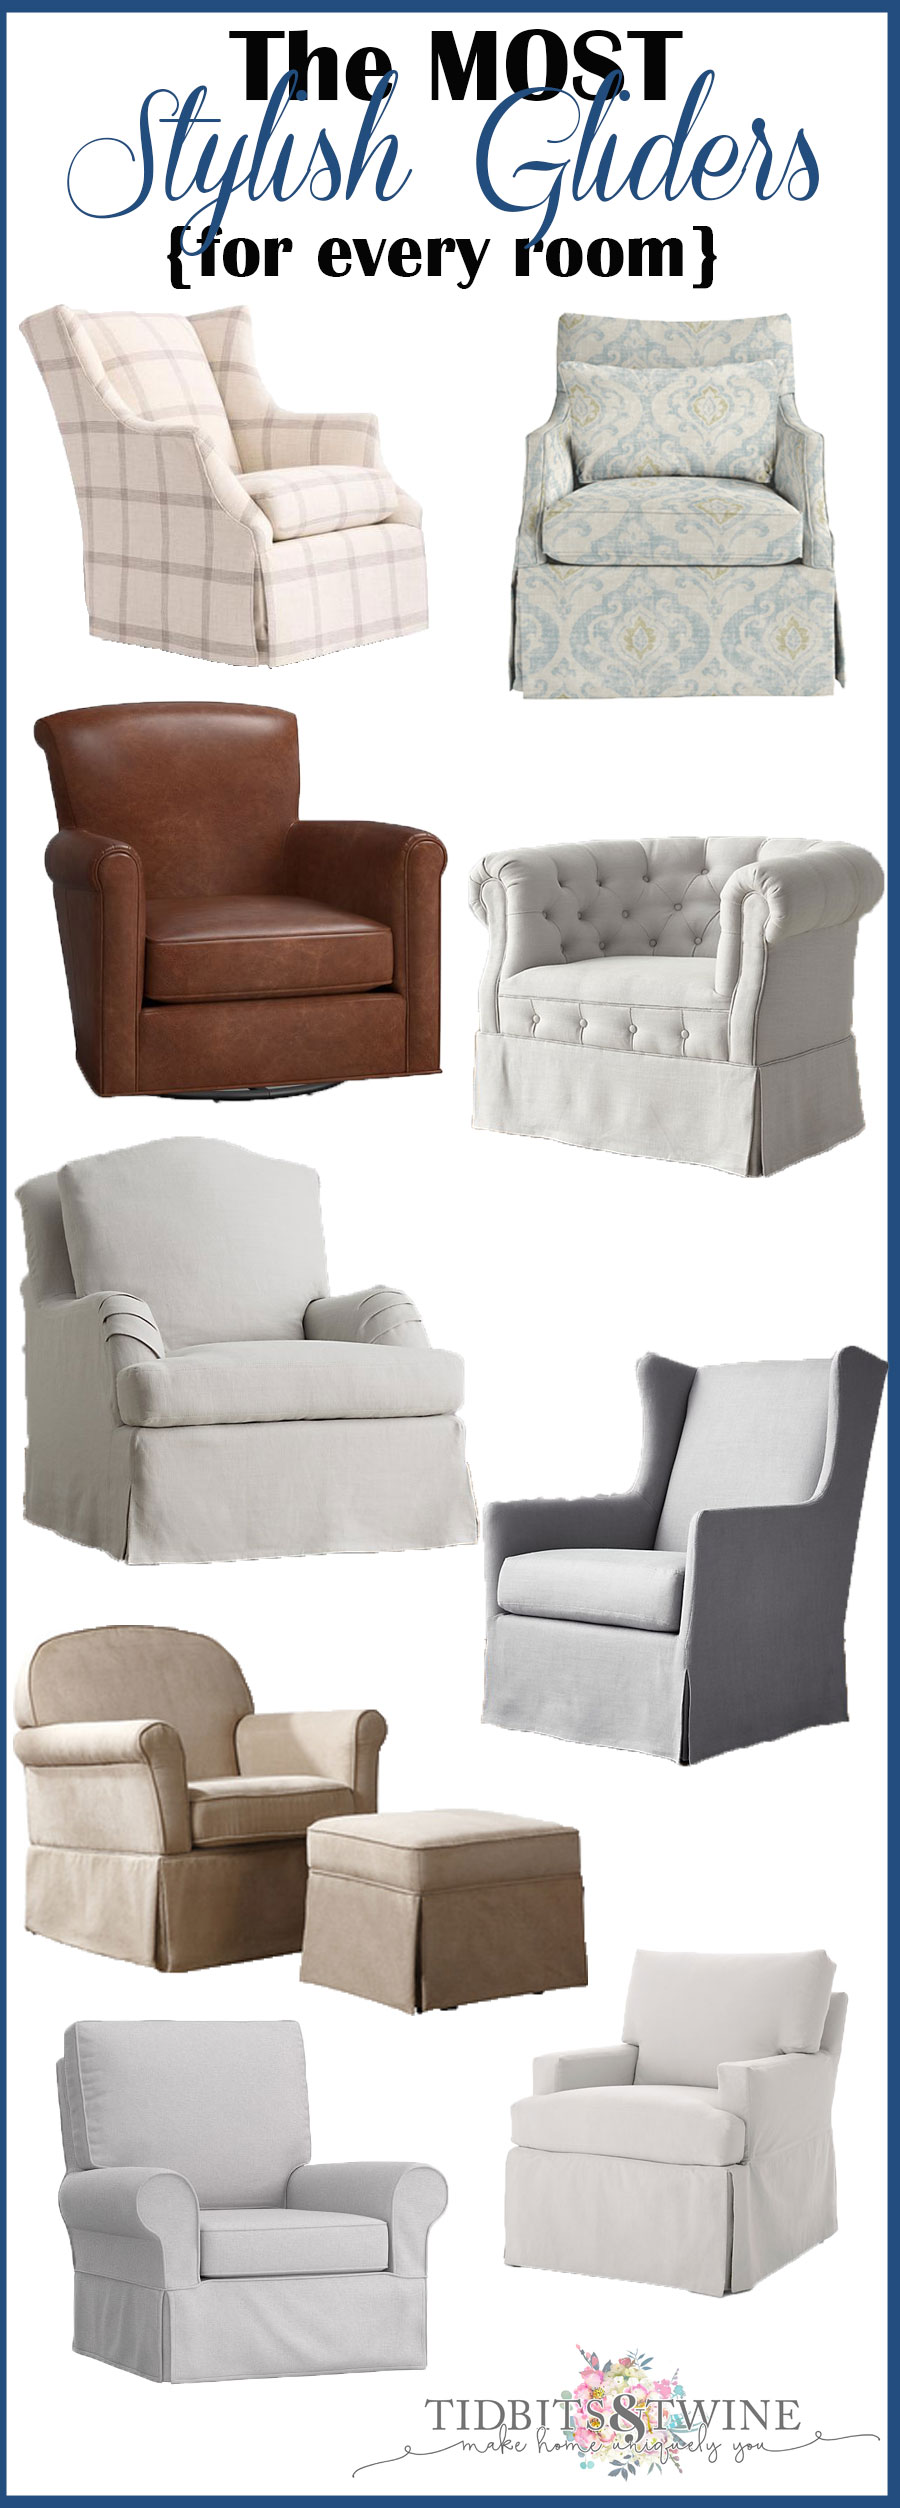 Stylish upholstered gliders with a traditional look